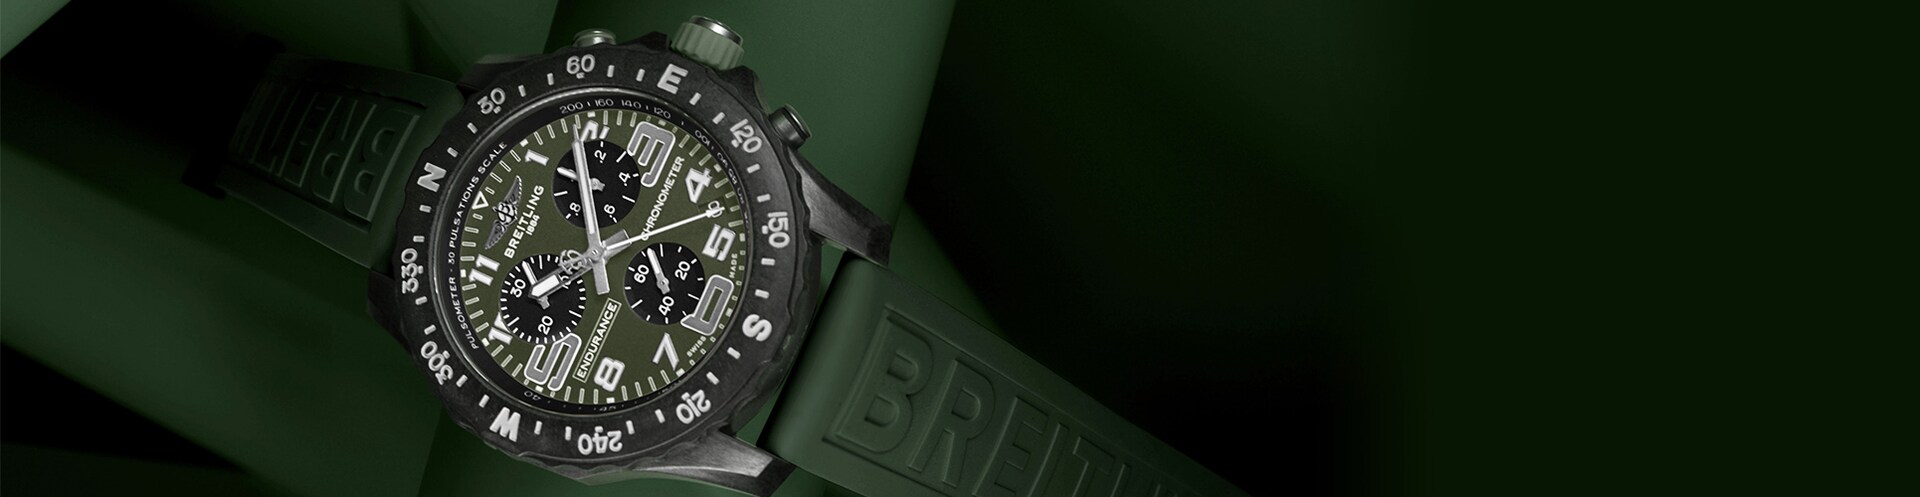 Breitling Endurance Pro Exclusive